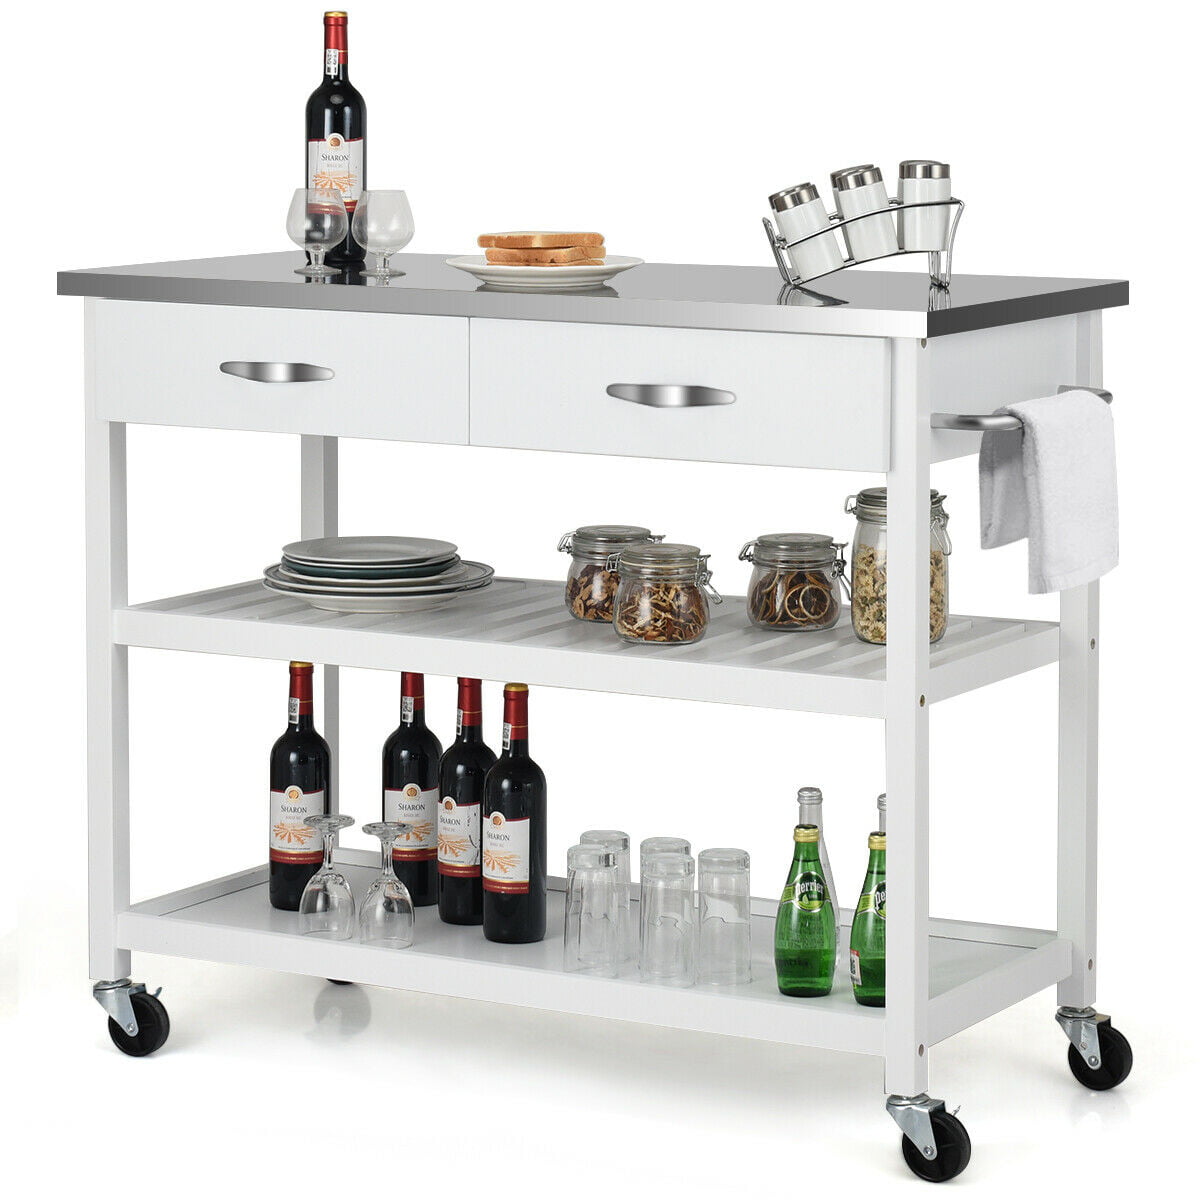 Costway Rolling Kitchen Trolley Cart Island Stainless Steel Countertop Stainless Steel Kitchen Island Cart